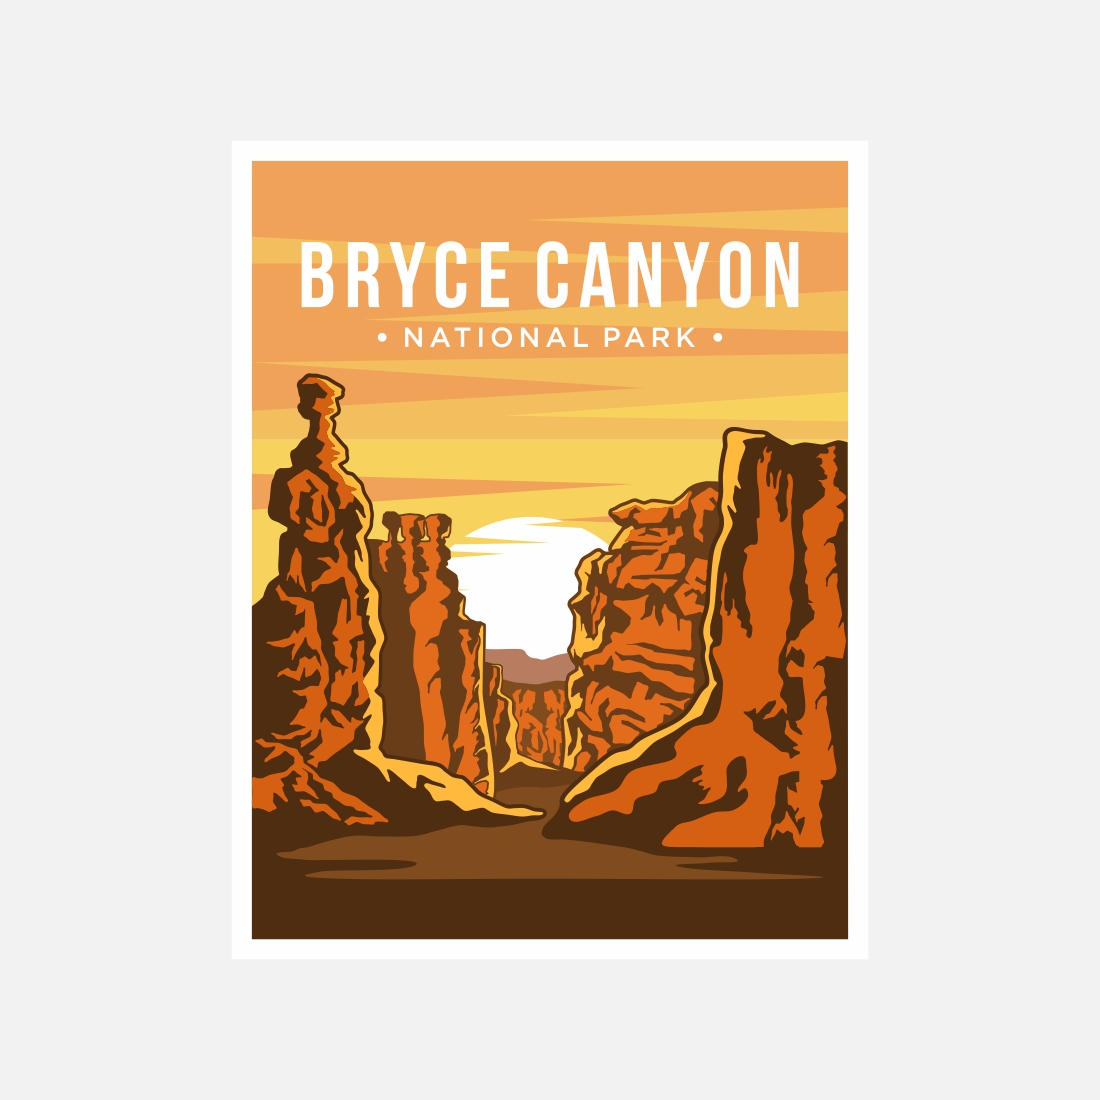 Bryce Canyon National Park Poster Vector Illustration - only $10 preview image.